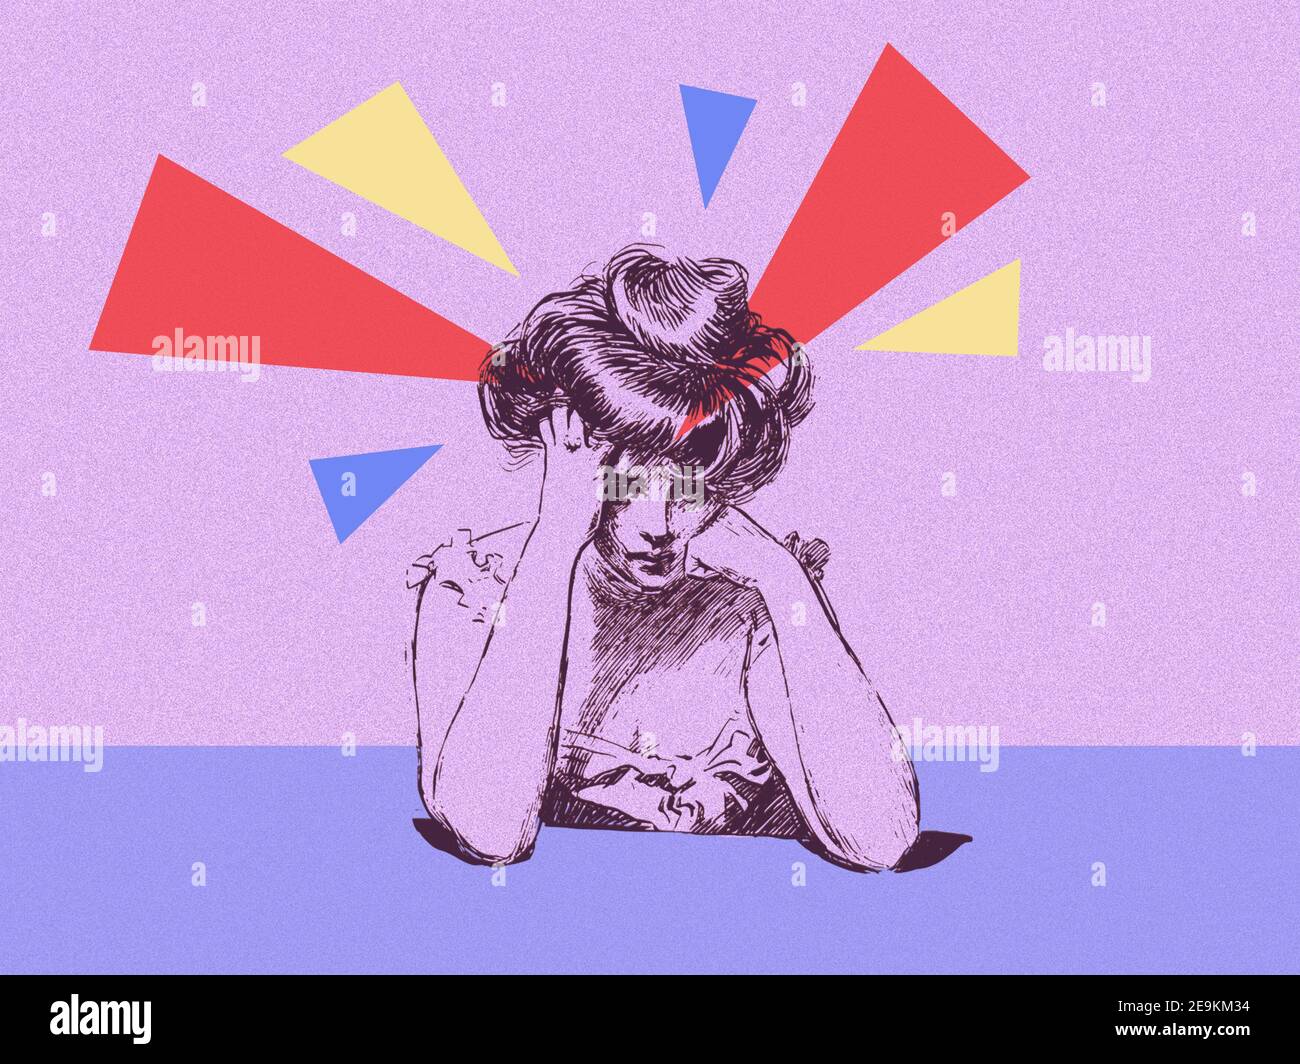 Worried woman vintage illustration with geometric art concept Stock Photo